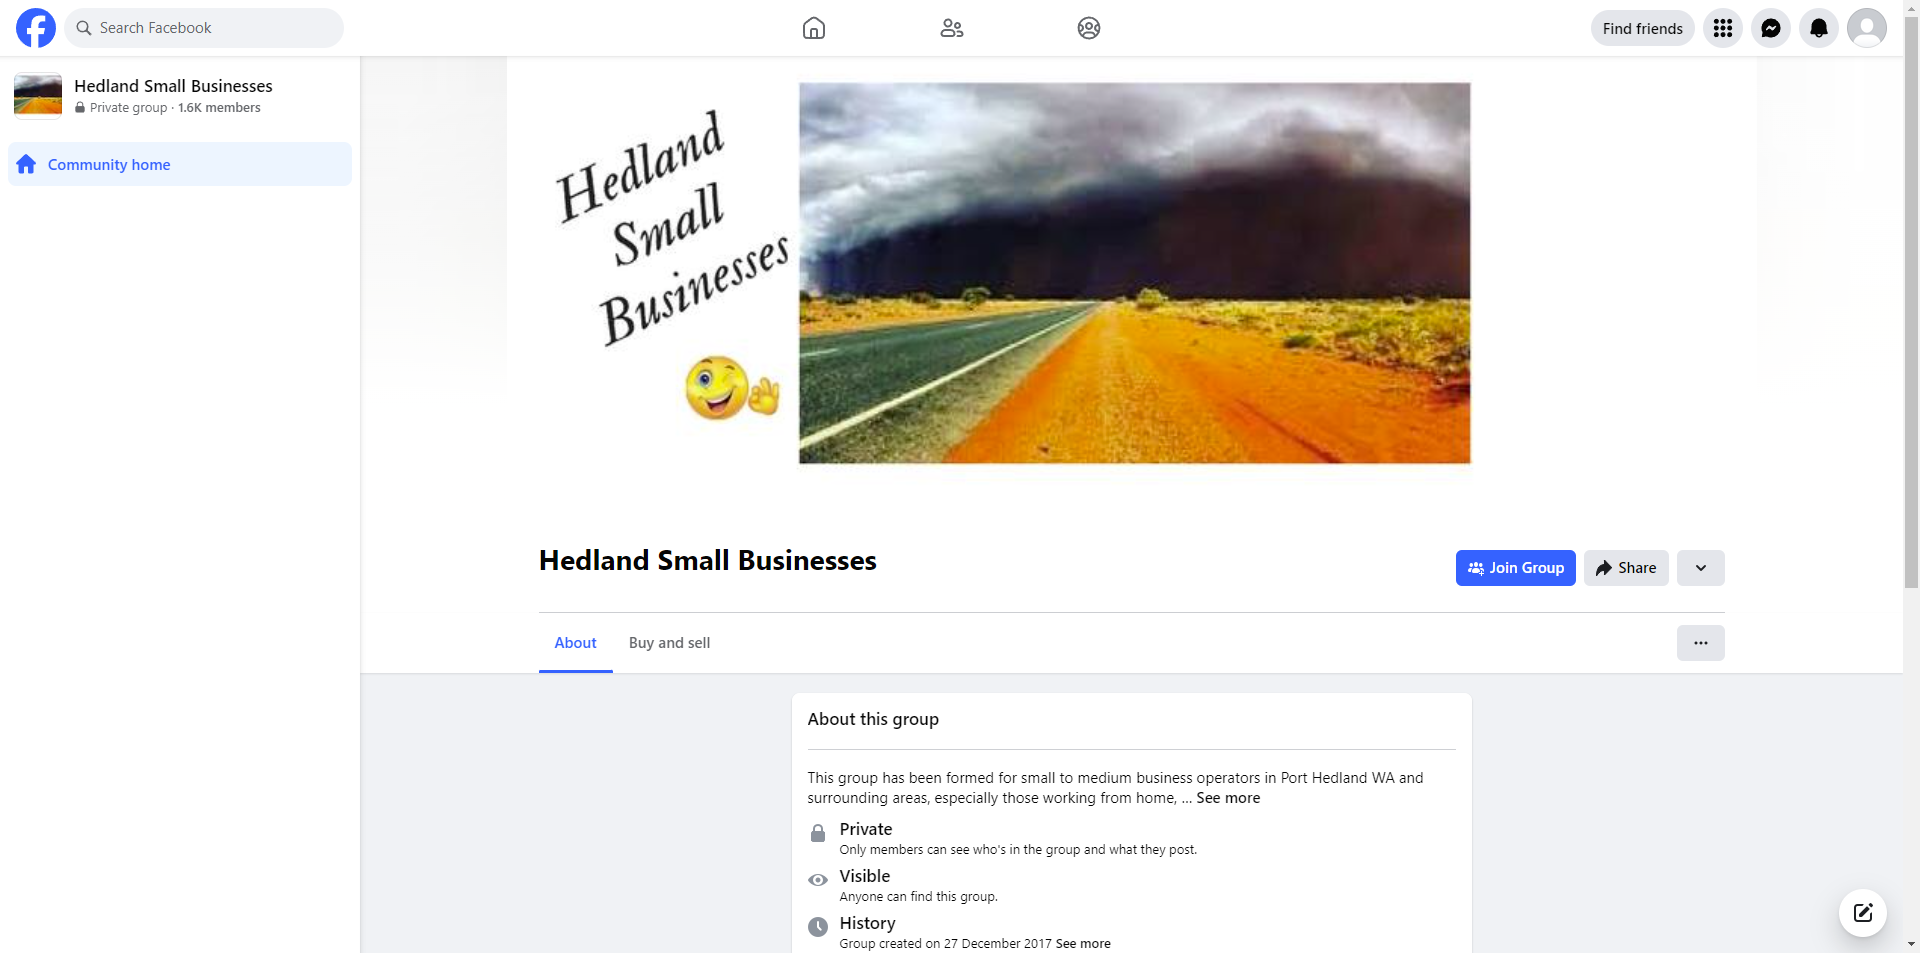 Hedland Small Businesses